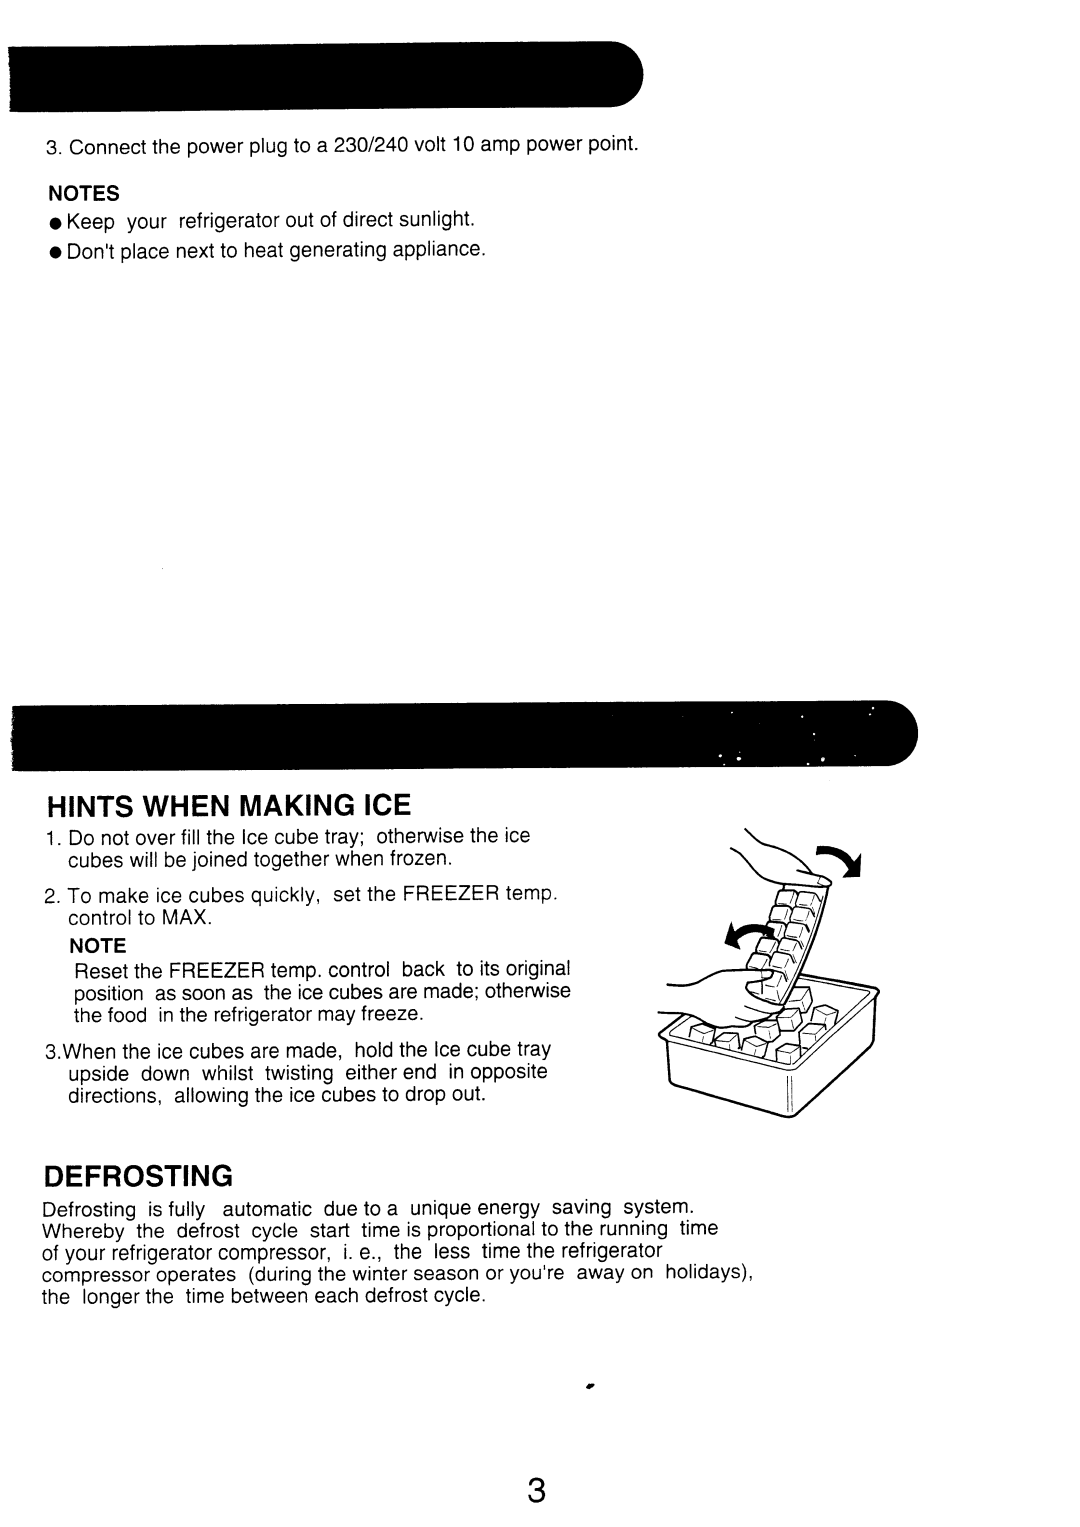 Sharp SJ-24G operation manual Hints When Making Ice, Defrosting 